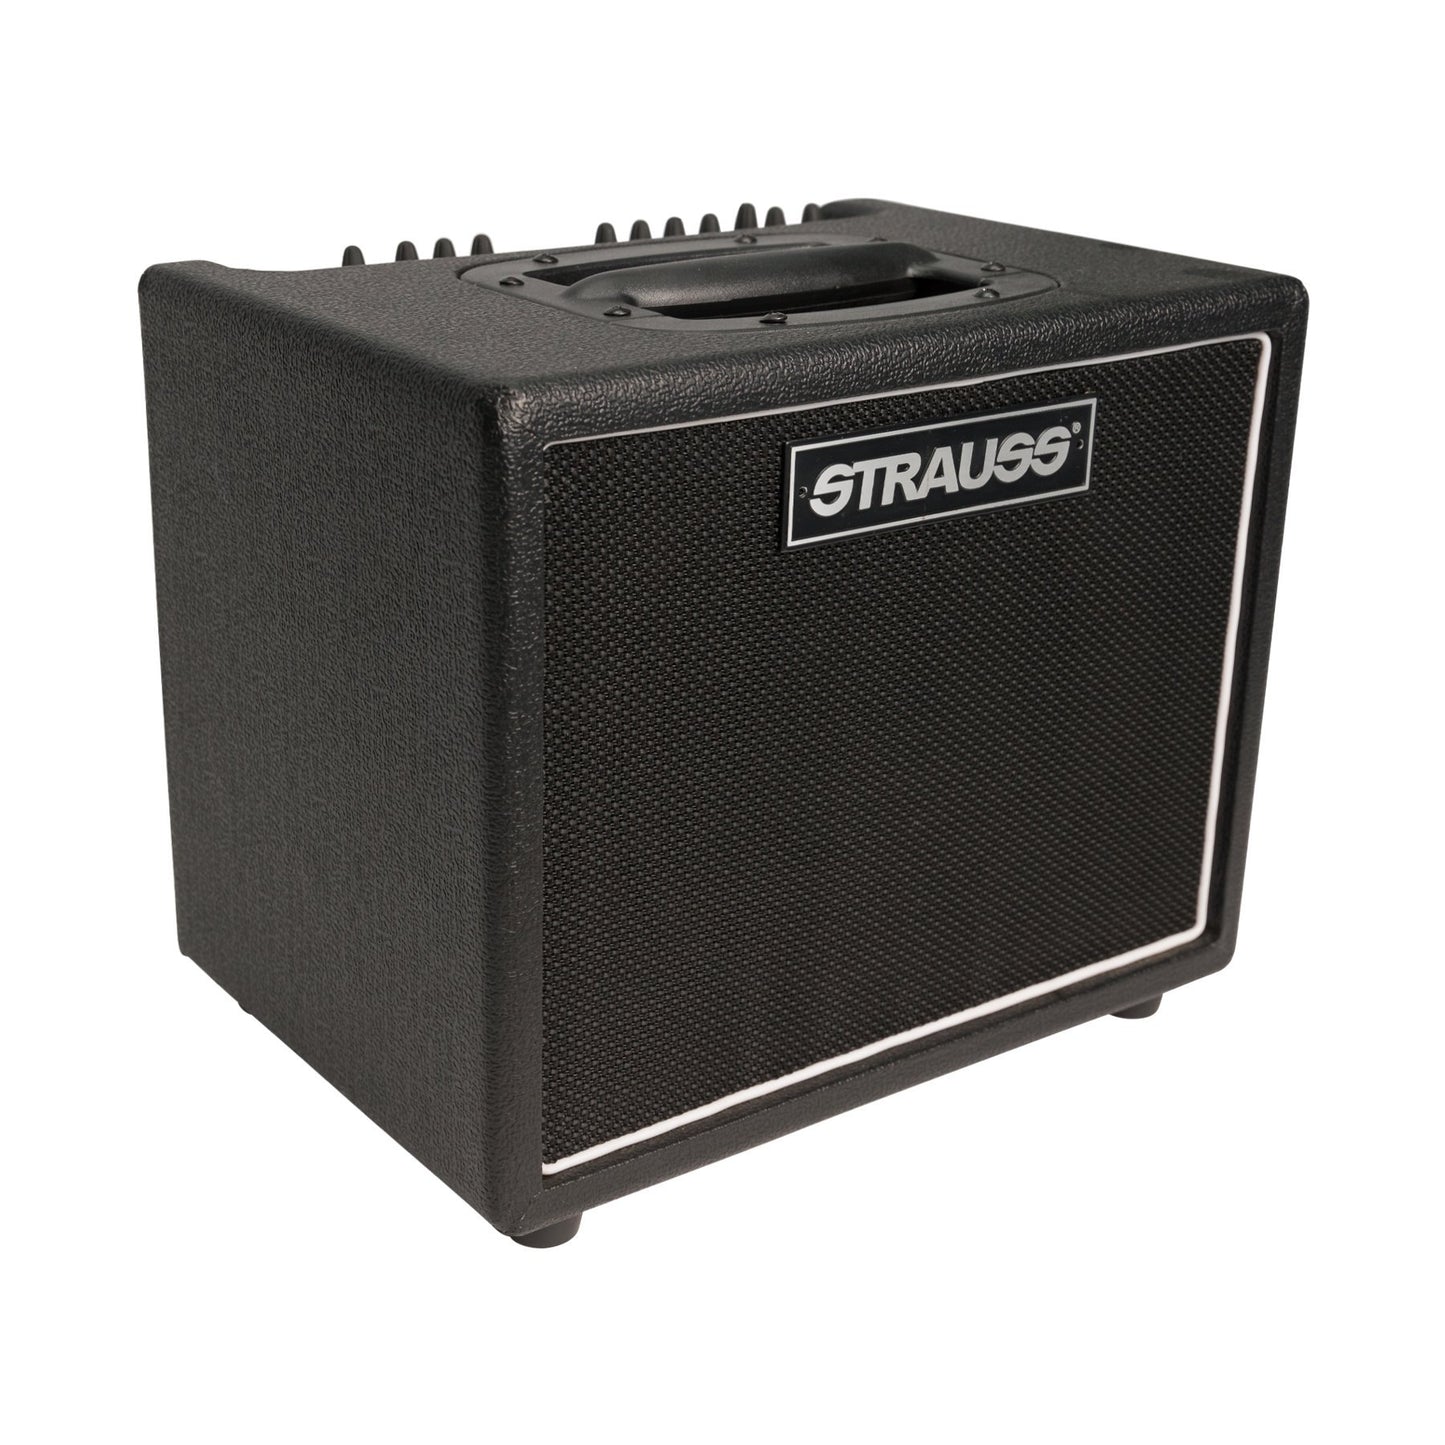 Strauss 60 Watt Acoustic Guitar Amplifier Combo with Effects (Black) - Musiclandshop